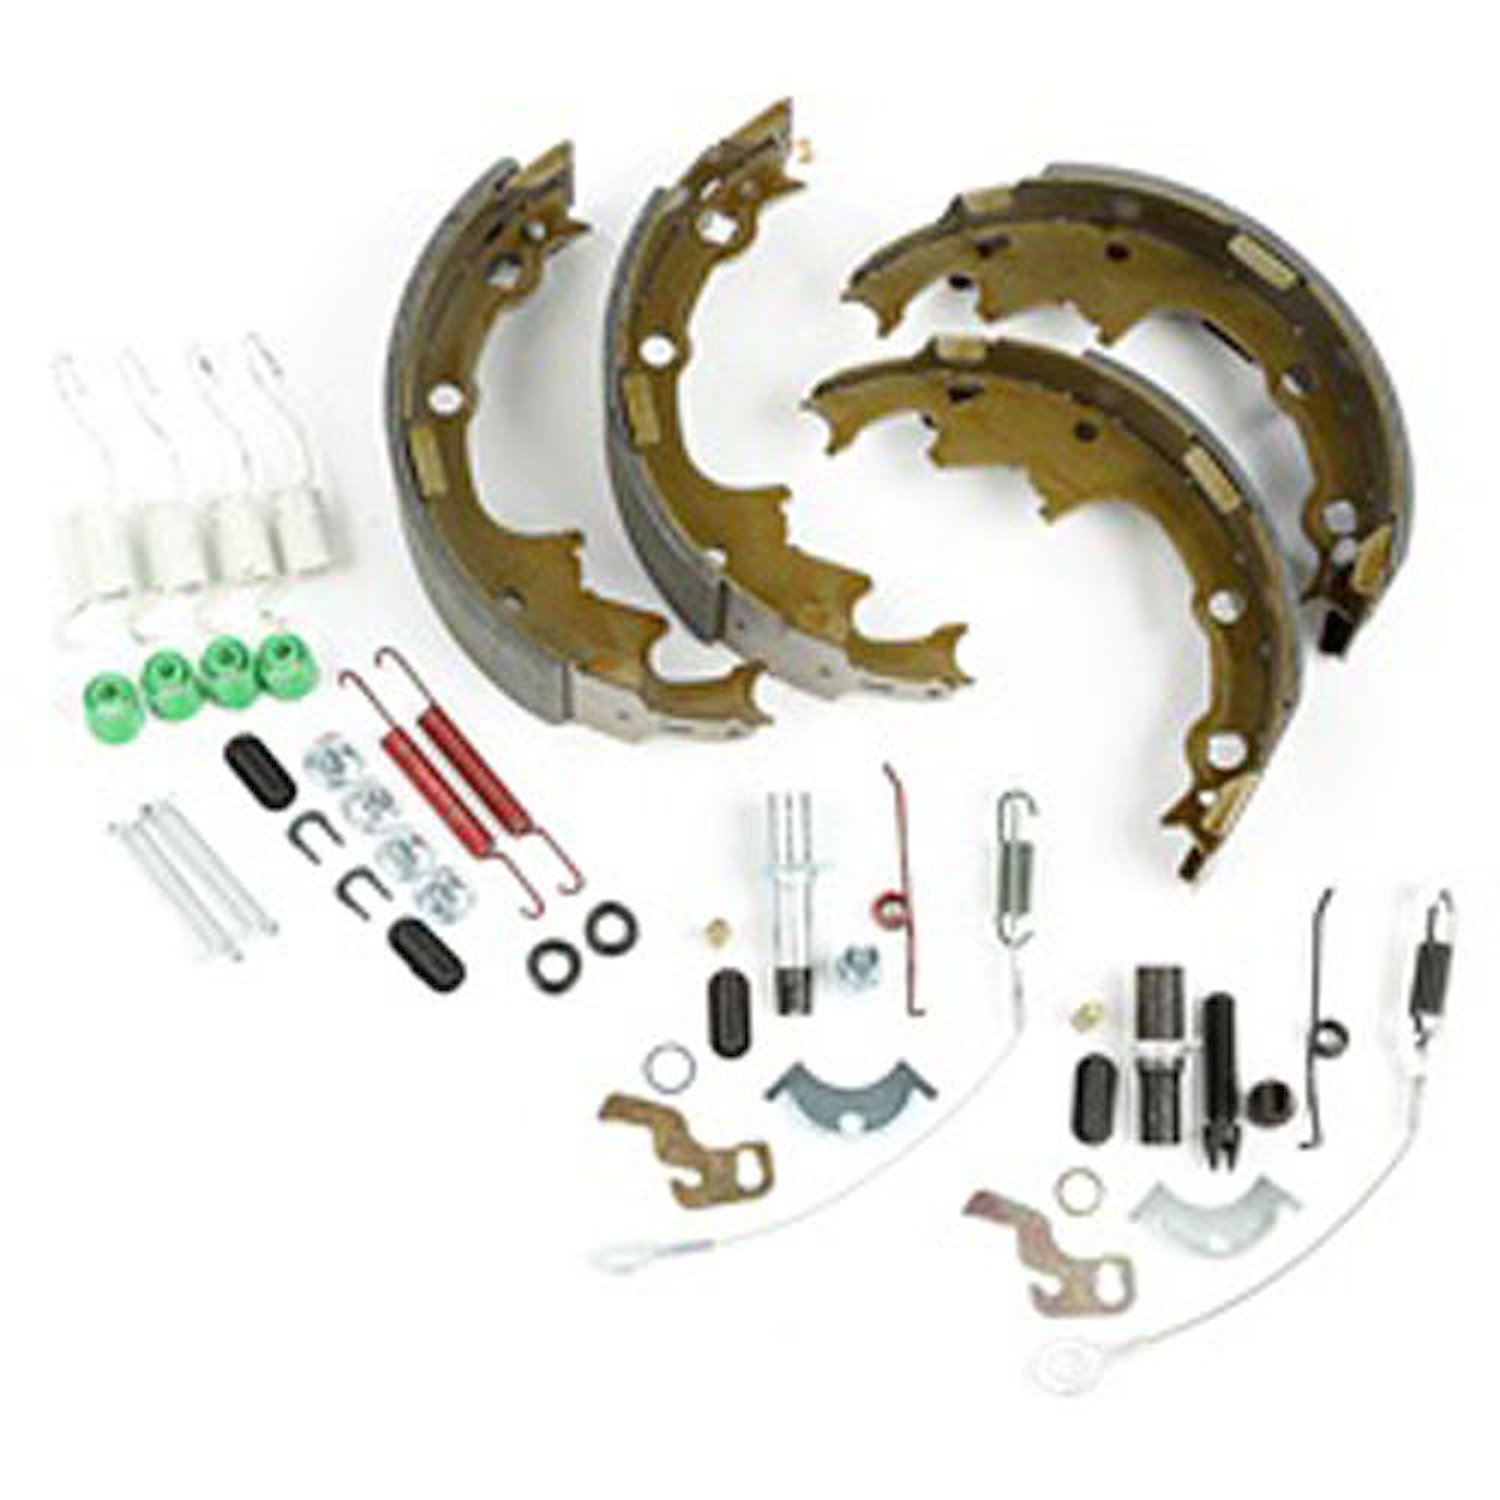 This drum brake service kit from Omix-ADA fits 1990-March 9 2000 Jeep Cherokees and Wranglers with 9 x 2-1/2 brake shoes.